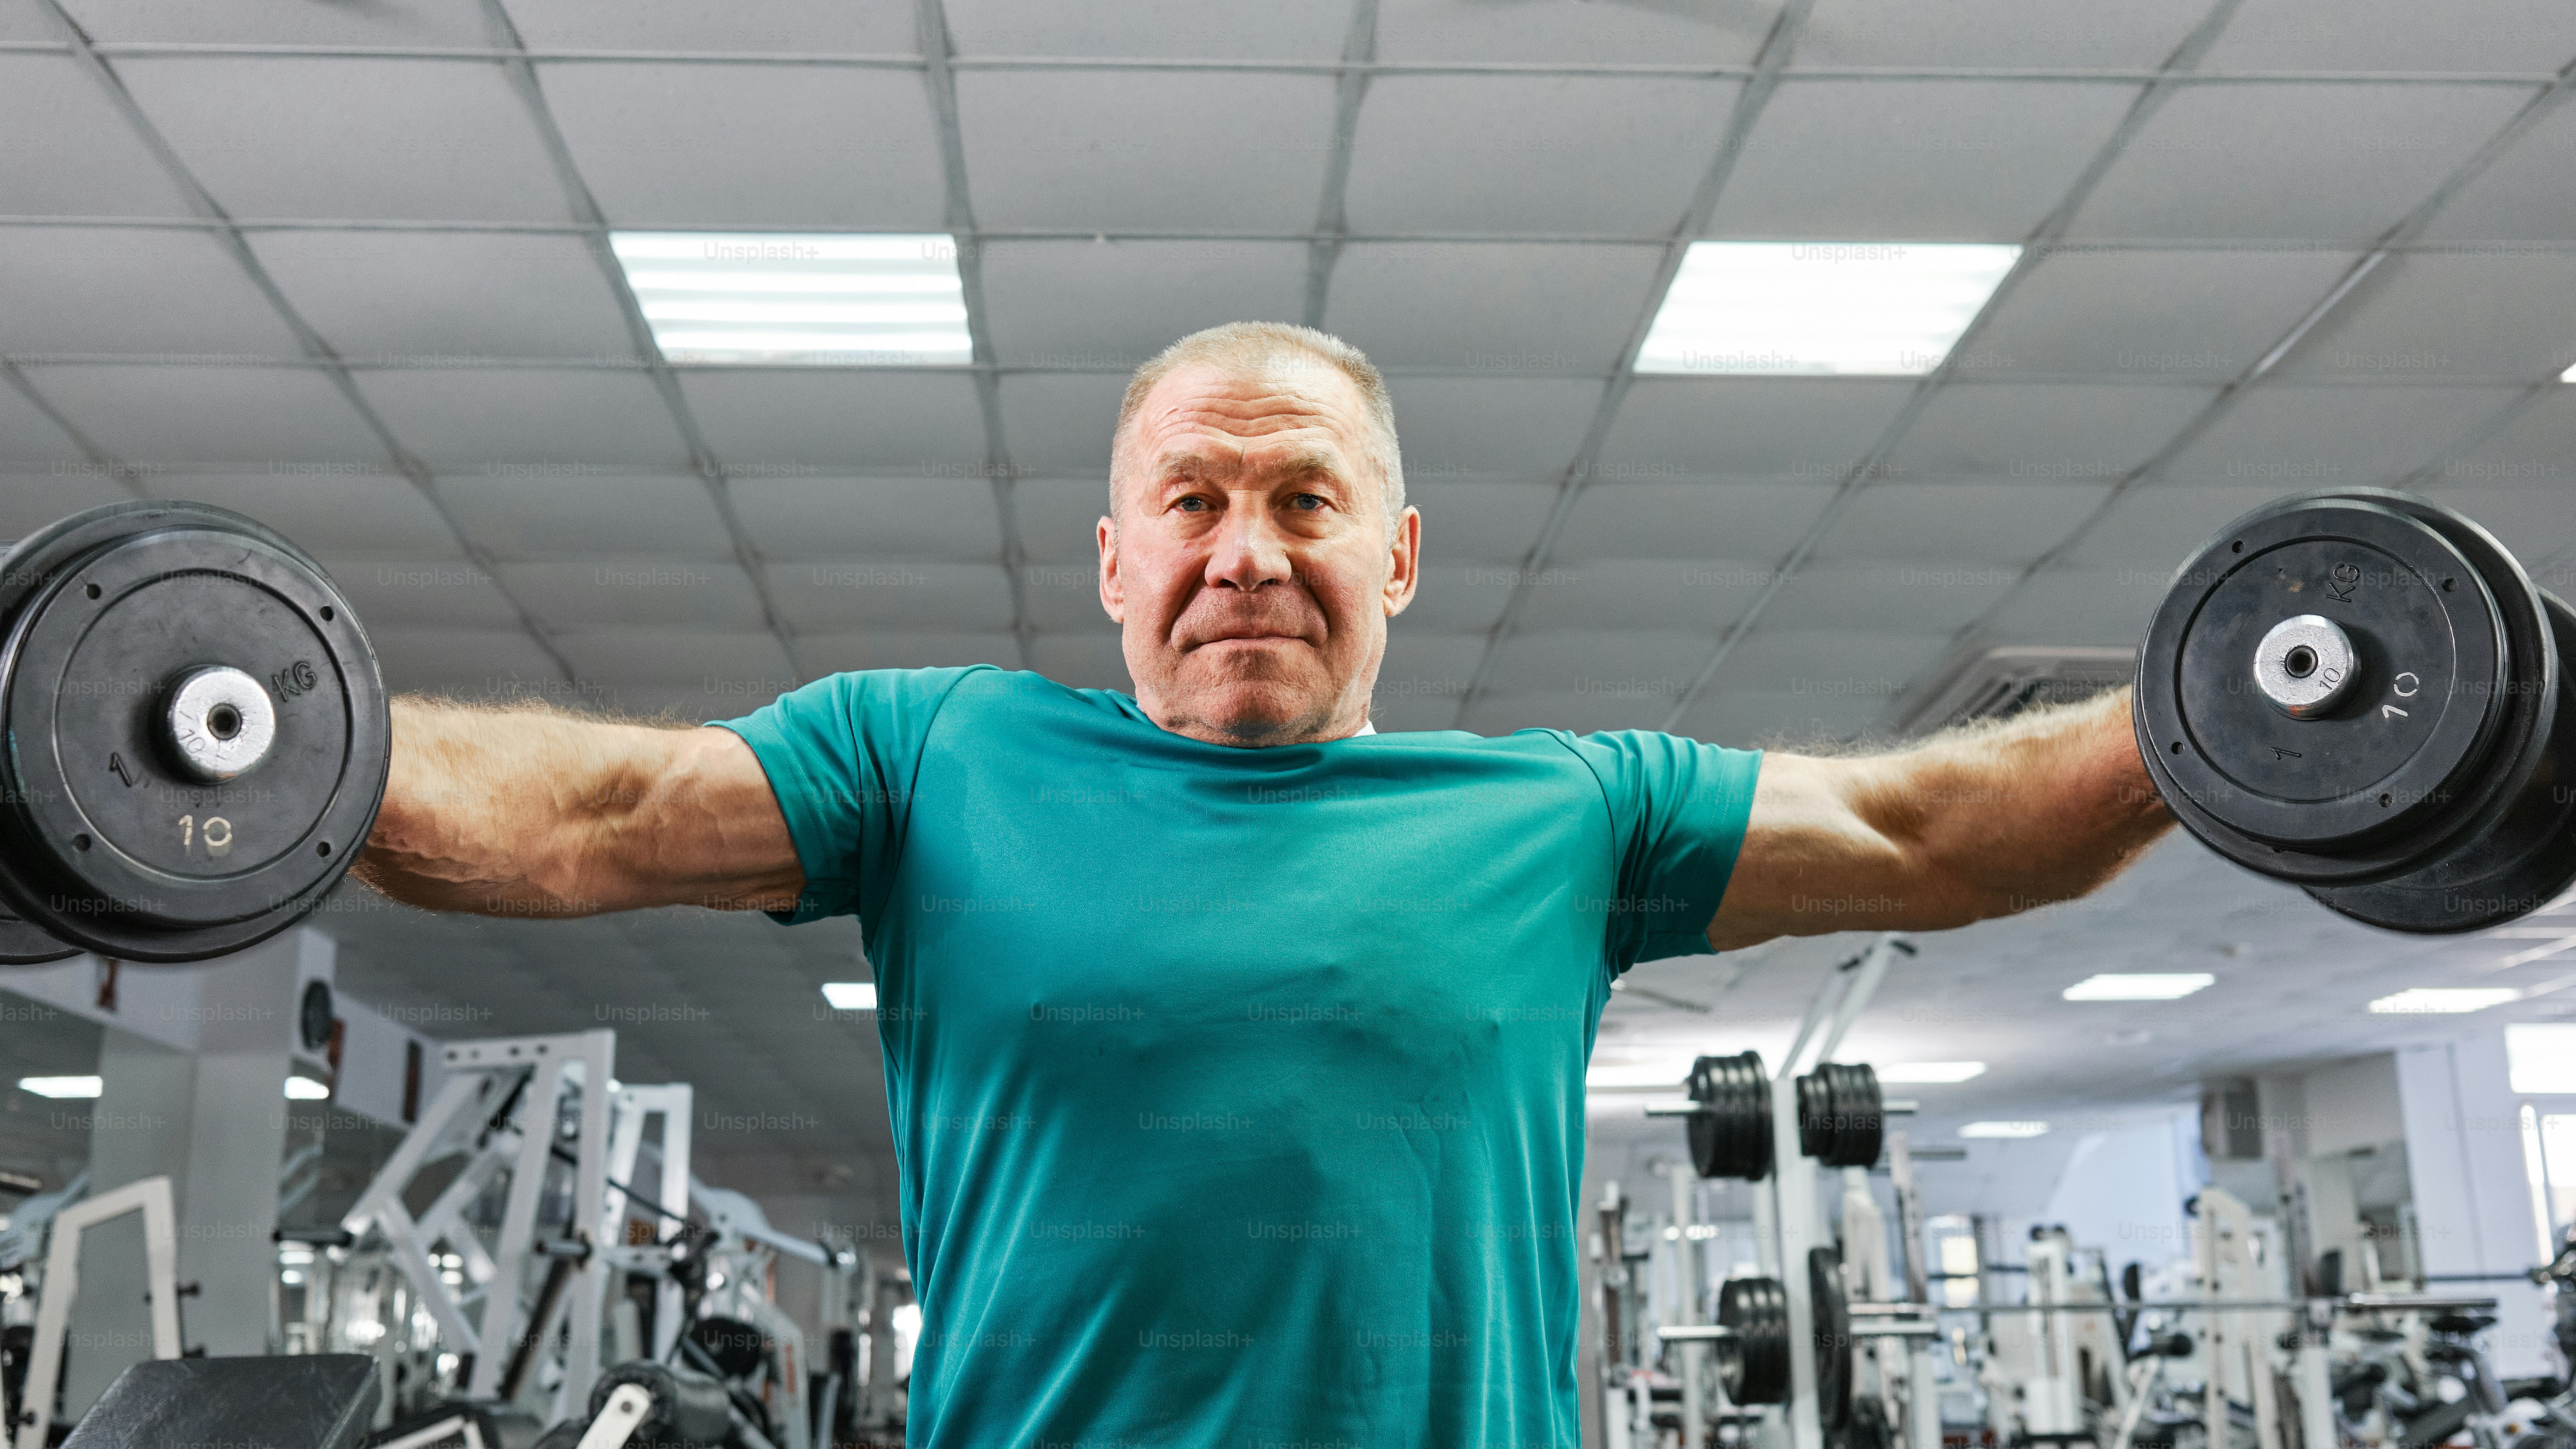 A retired man doing exercises with dumbbells at the gym